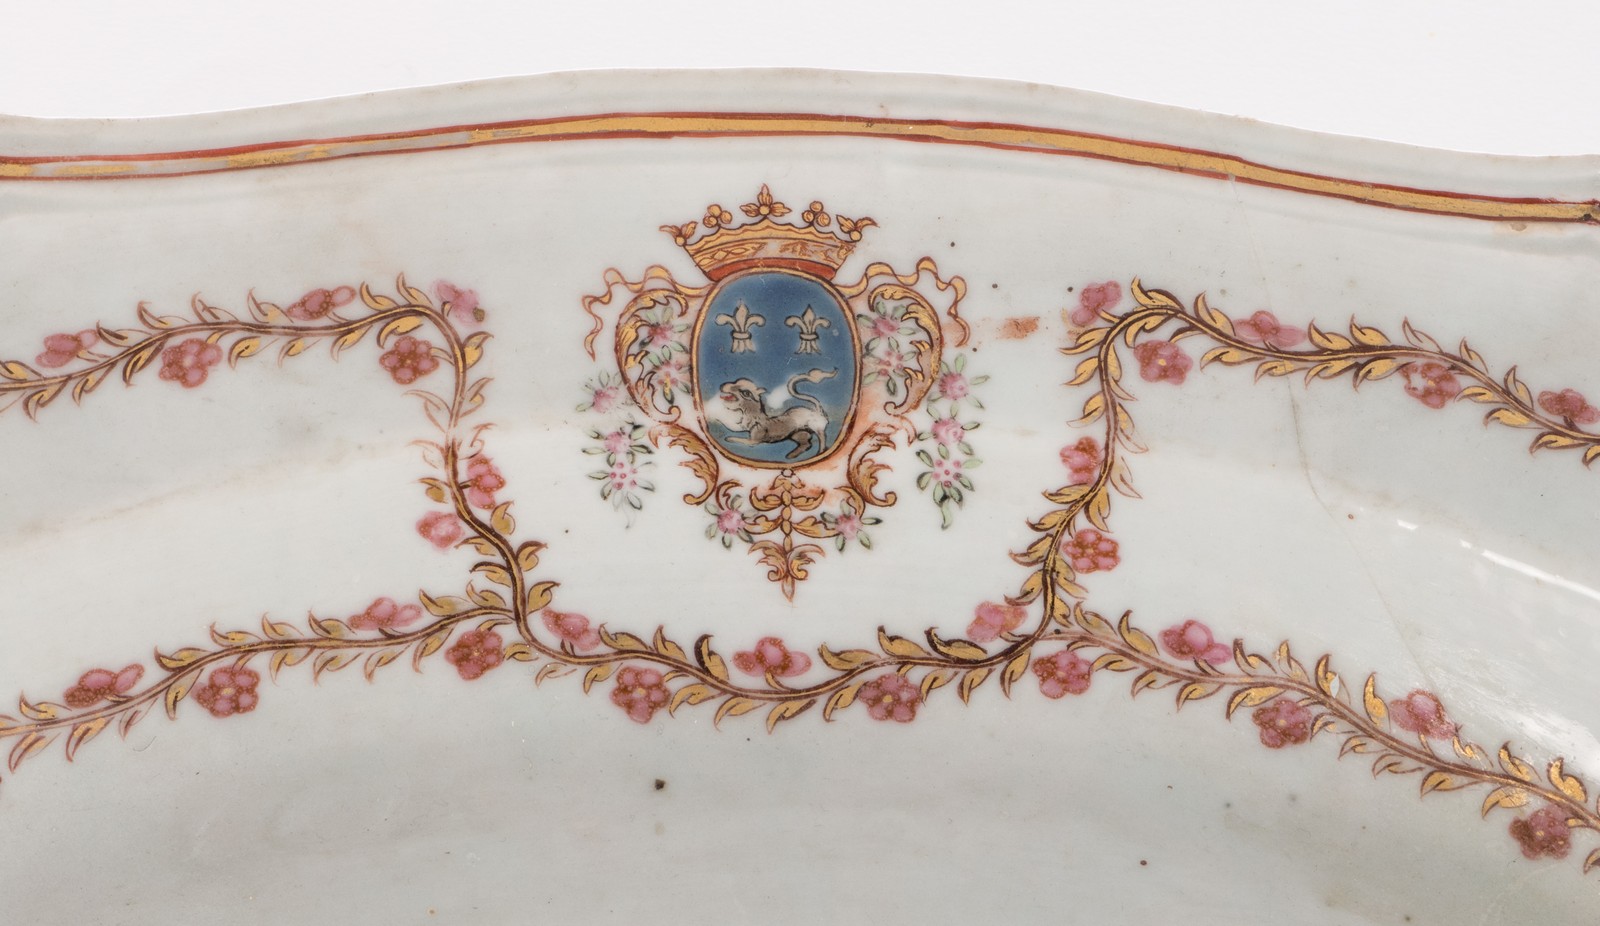 A Chinese dish with profiled edge and famille rose decorated, 18thC, 31 x 39 cm (restoration) - Image 4 of 8